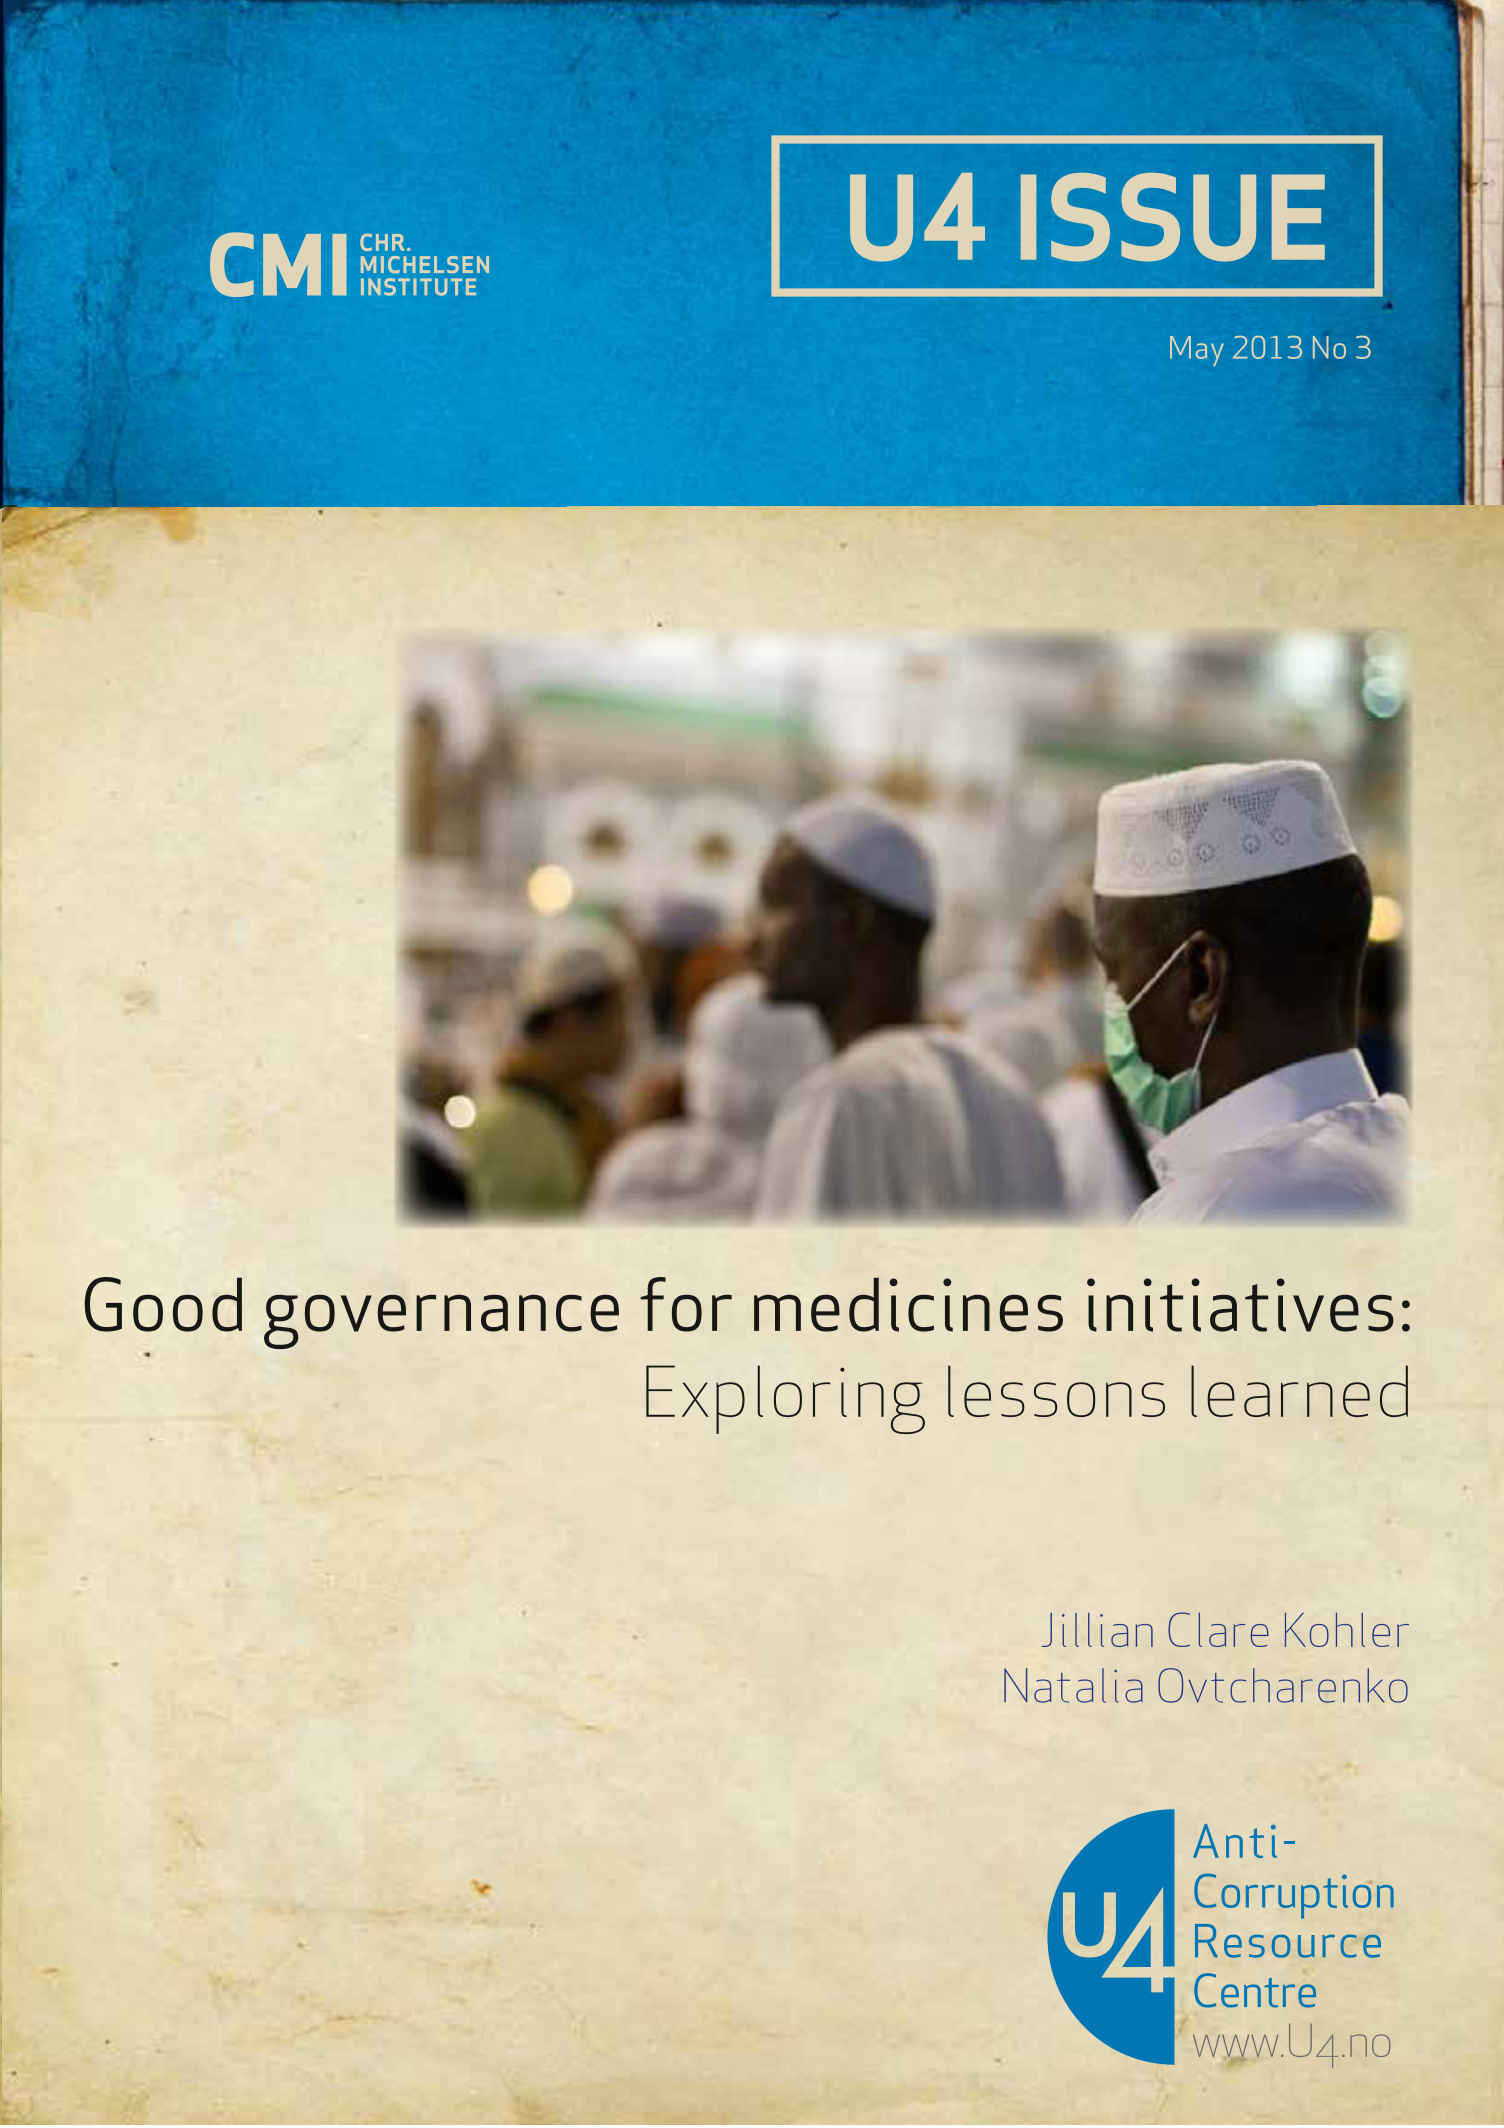 Good governance for medicines initiatives: Exploring lessons learned